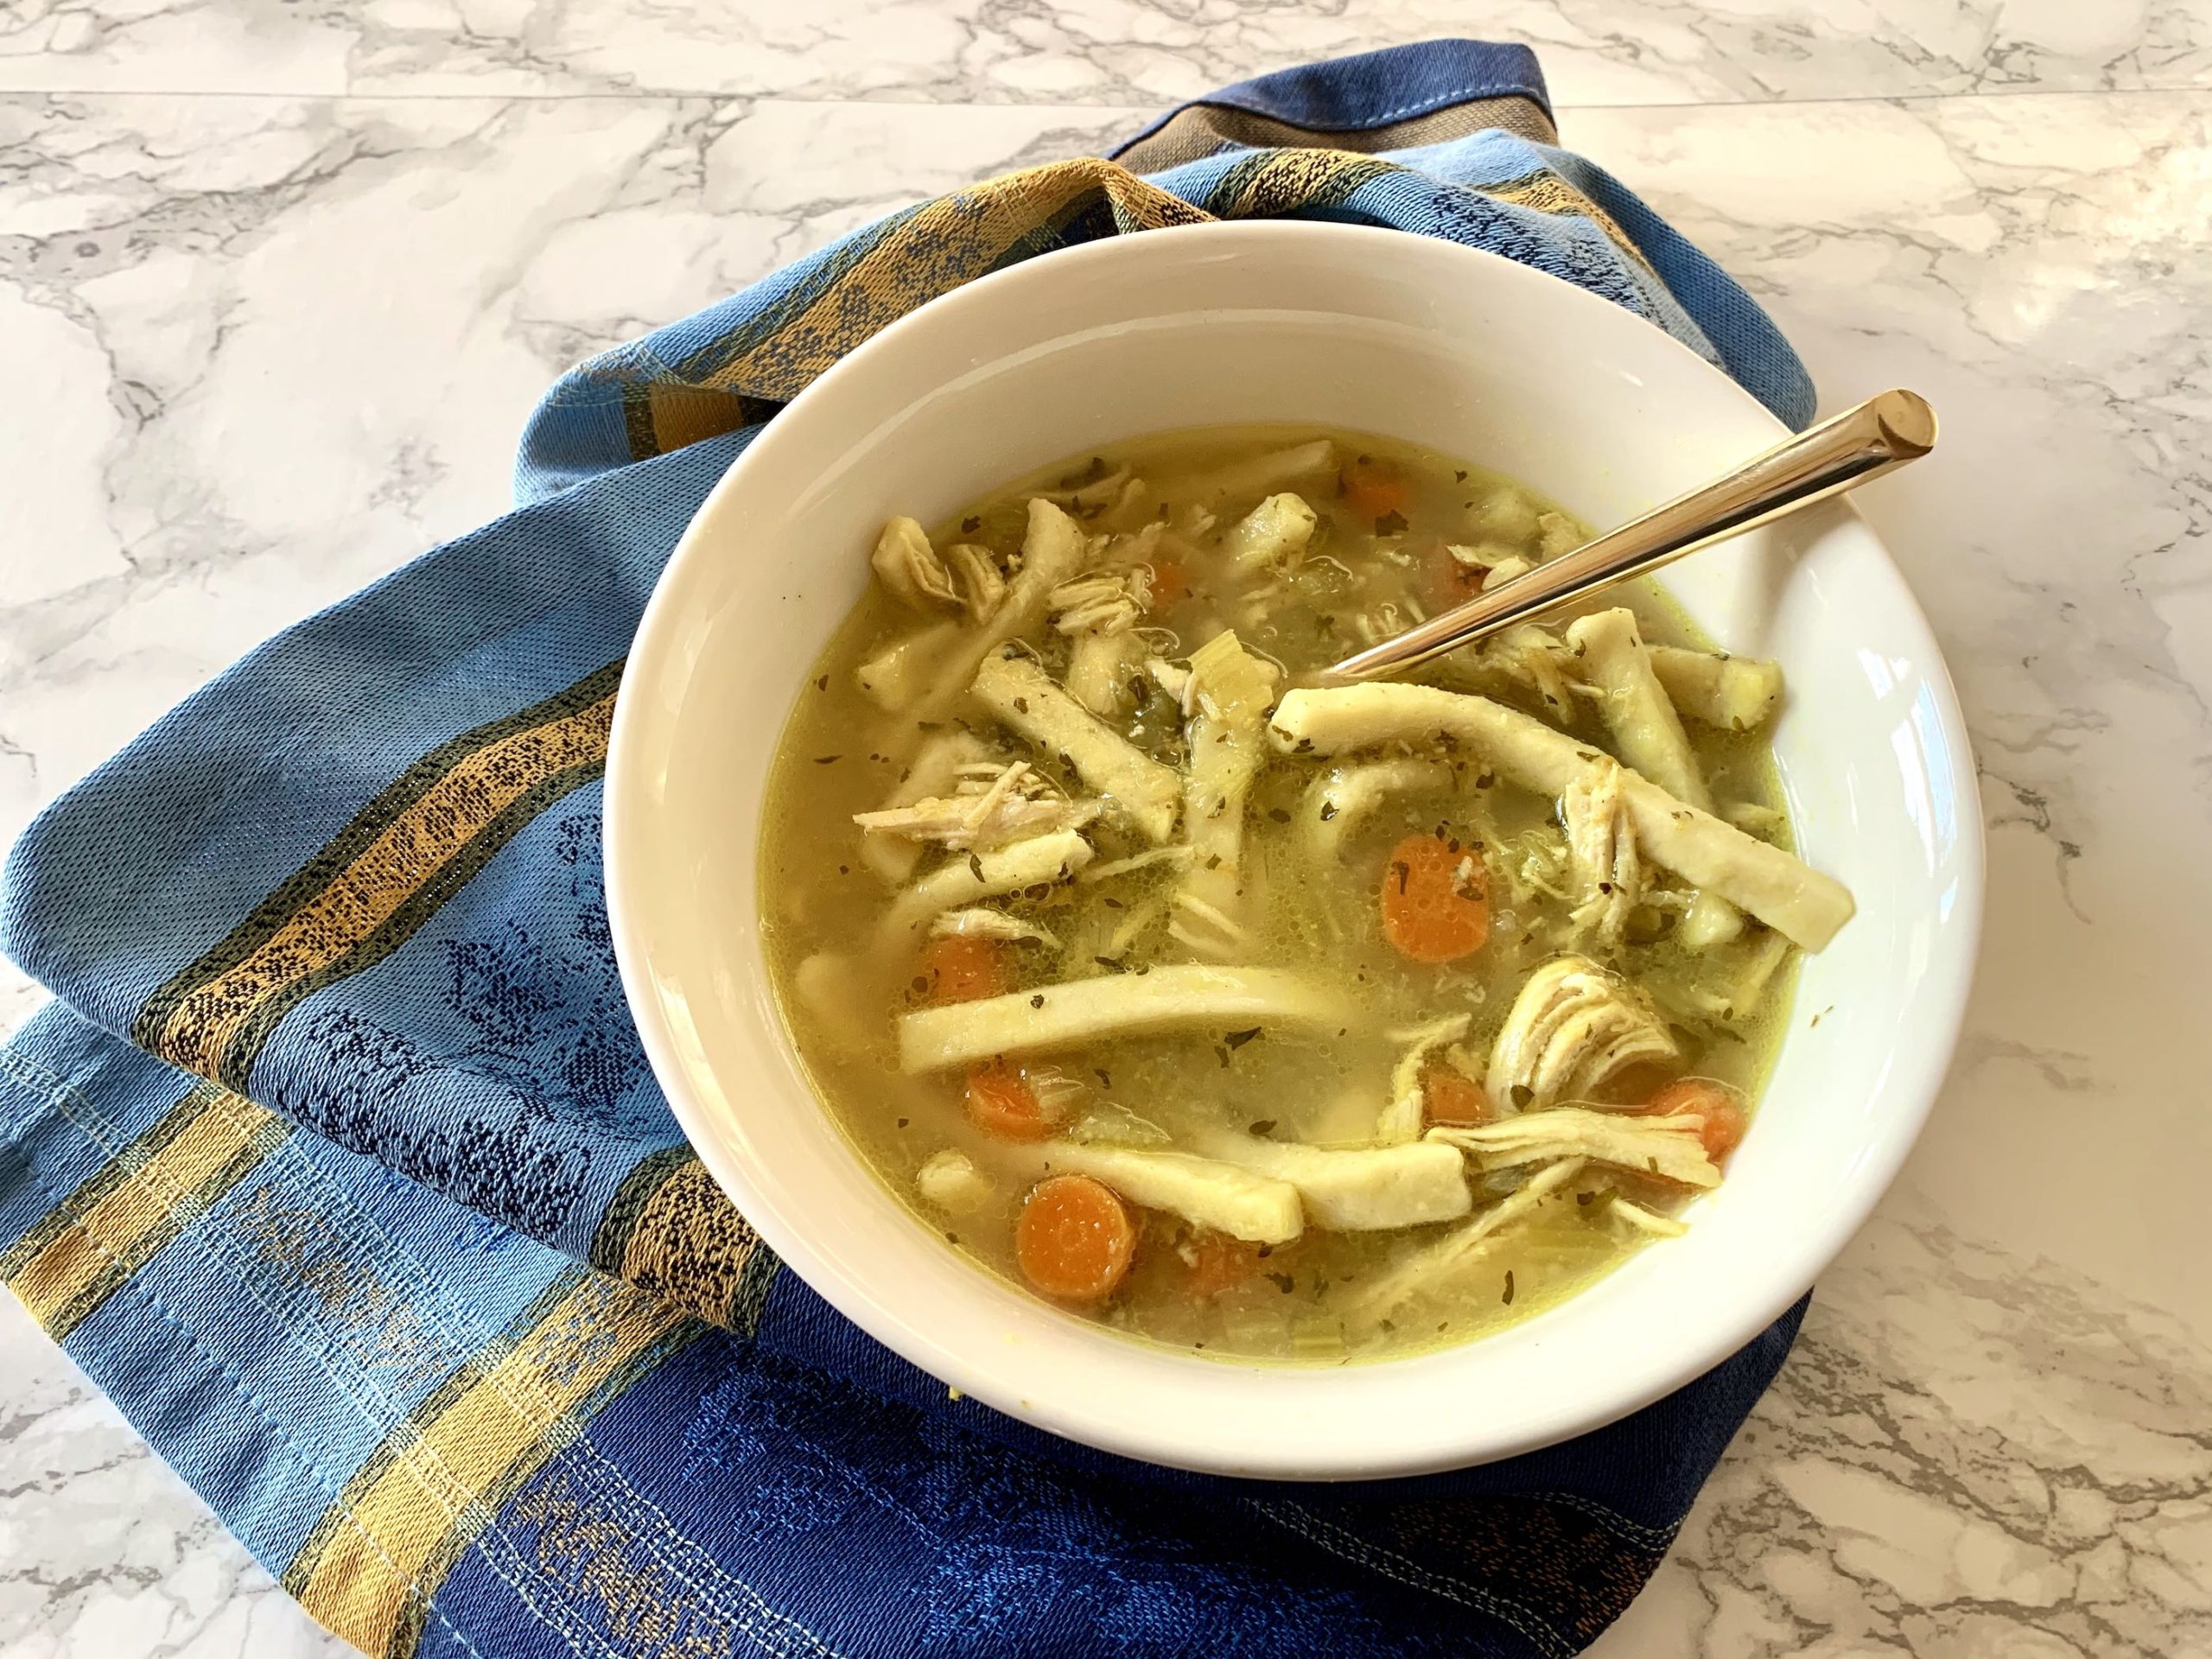 The Reames Chicken Noodle Soup